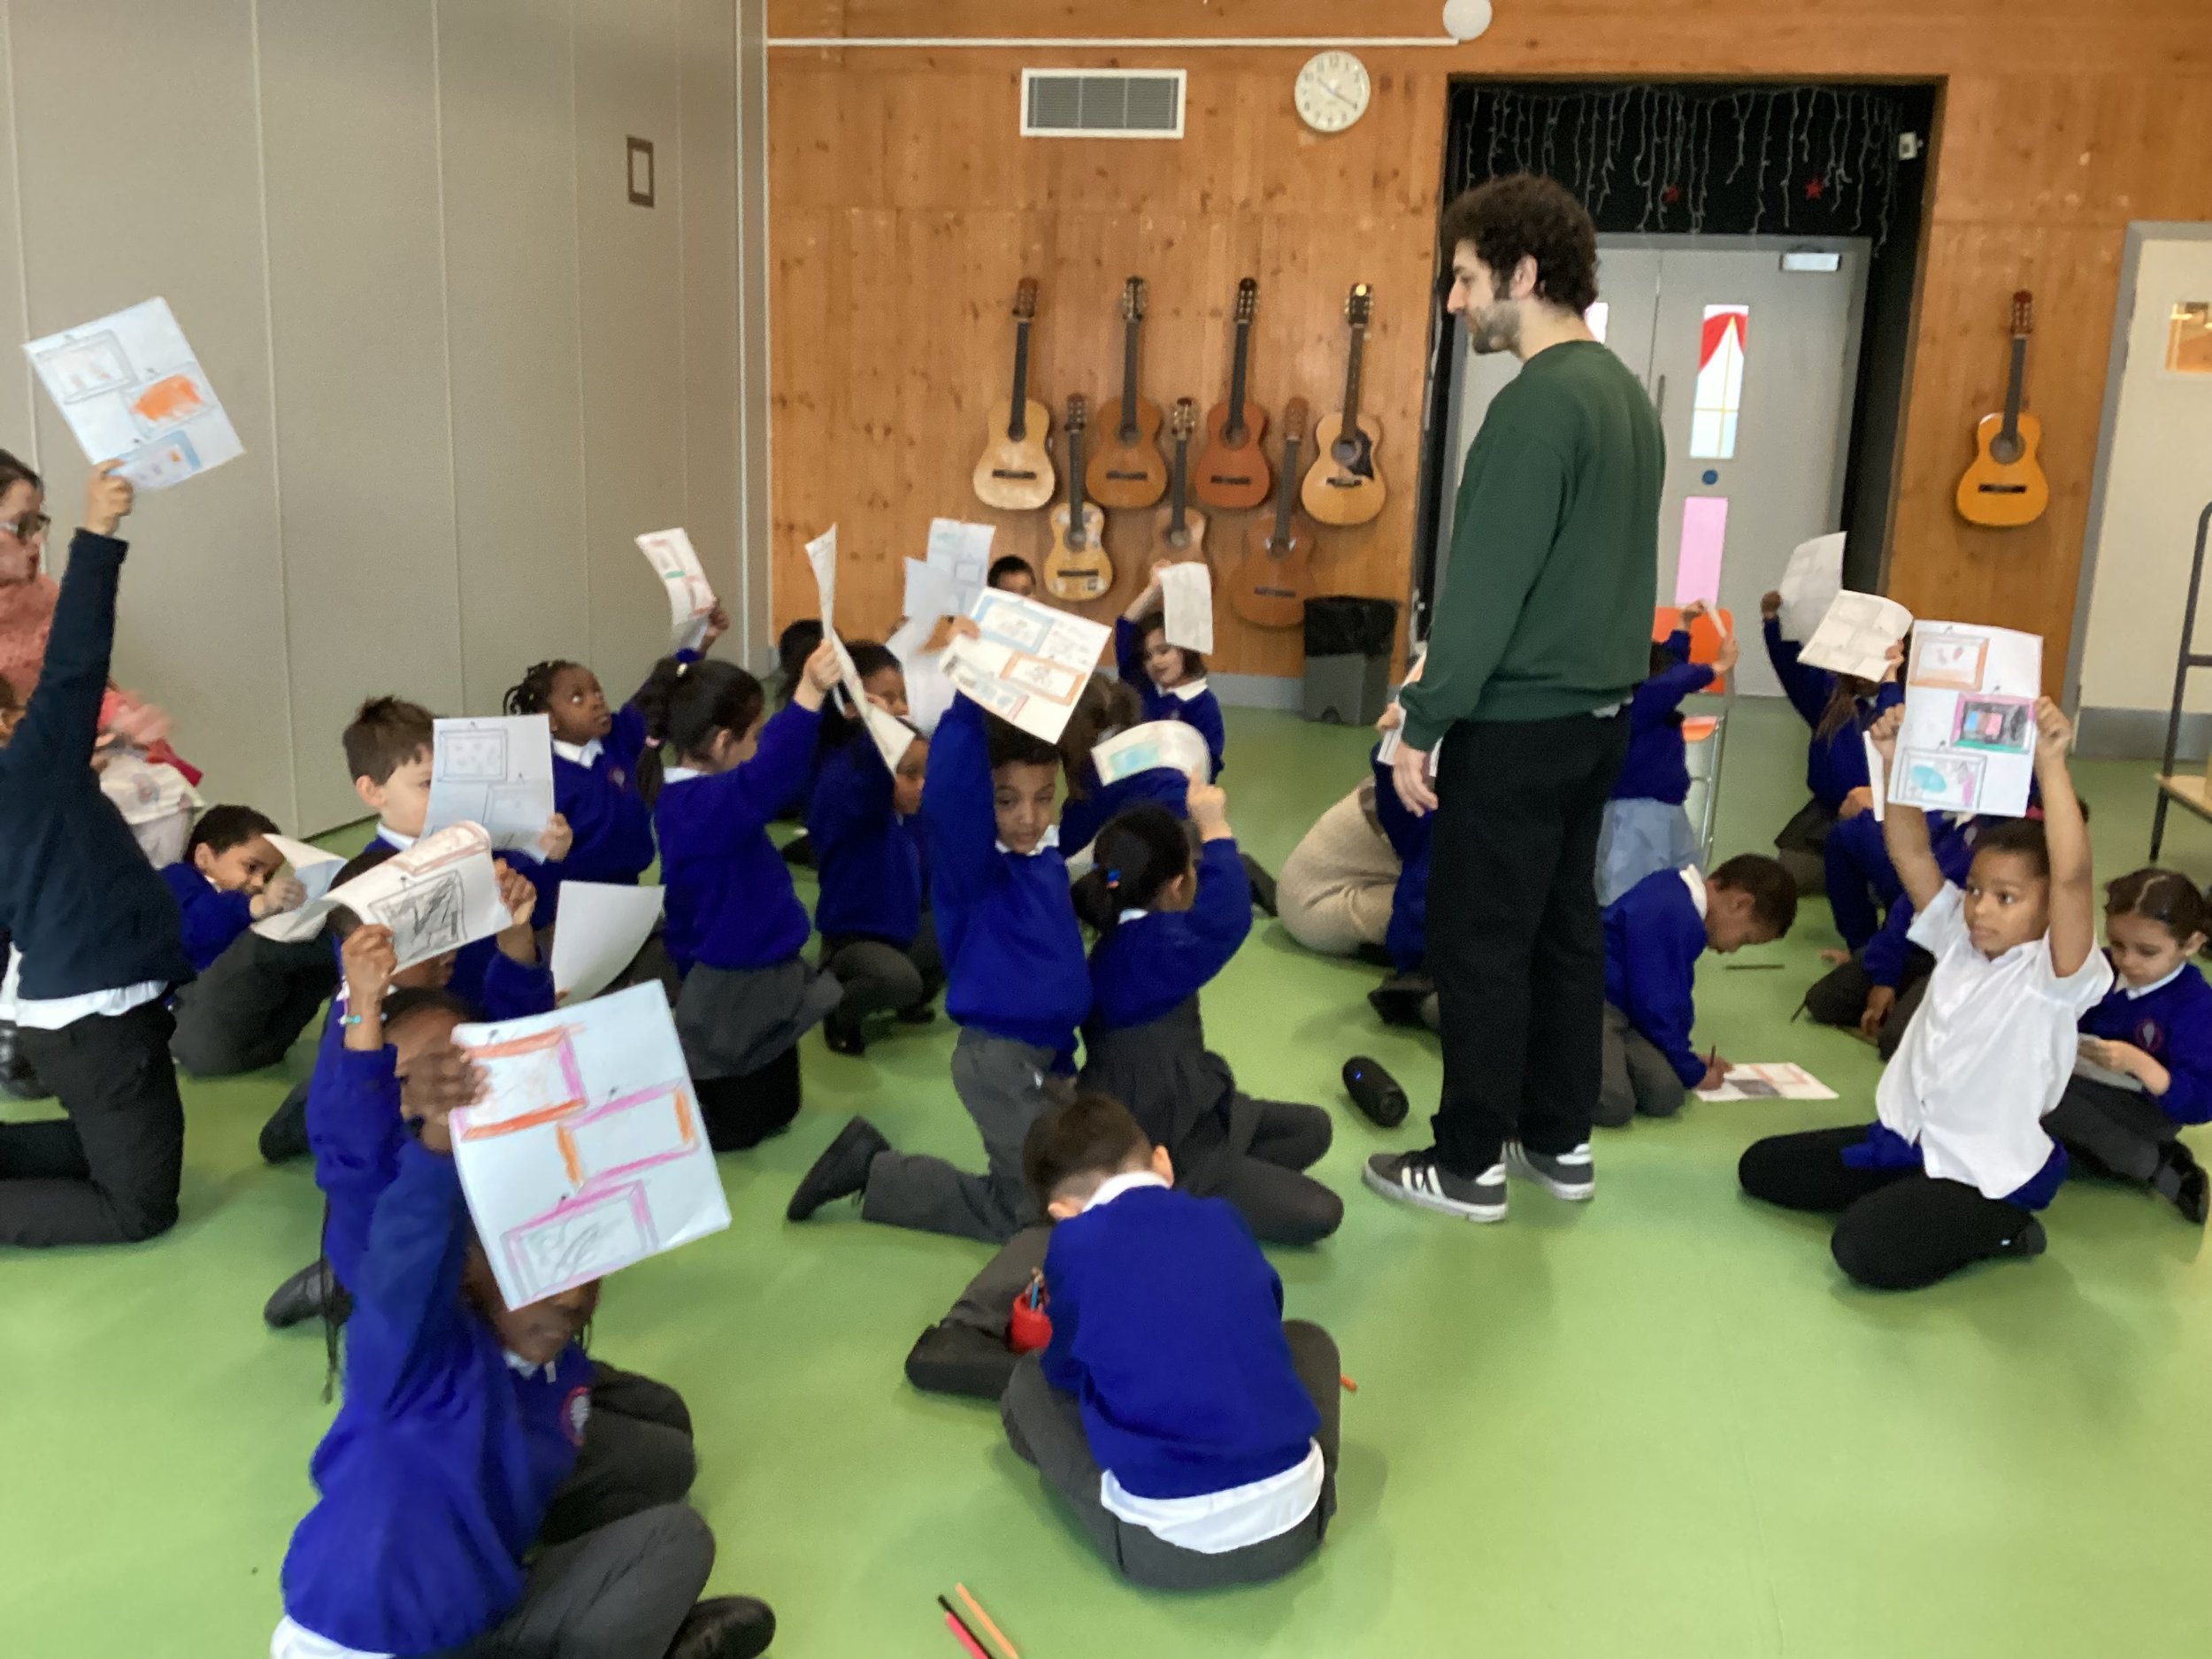 Music Workshop - Creating A Song!